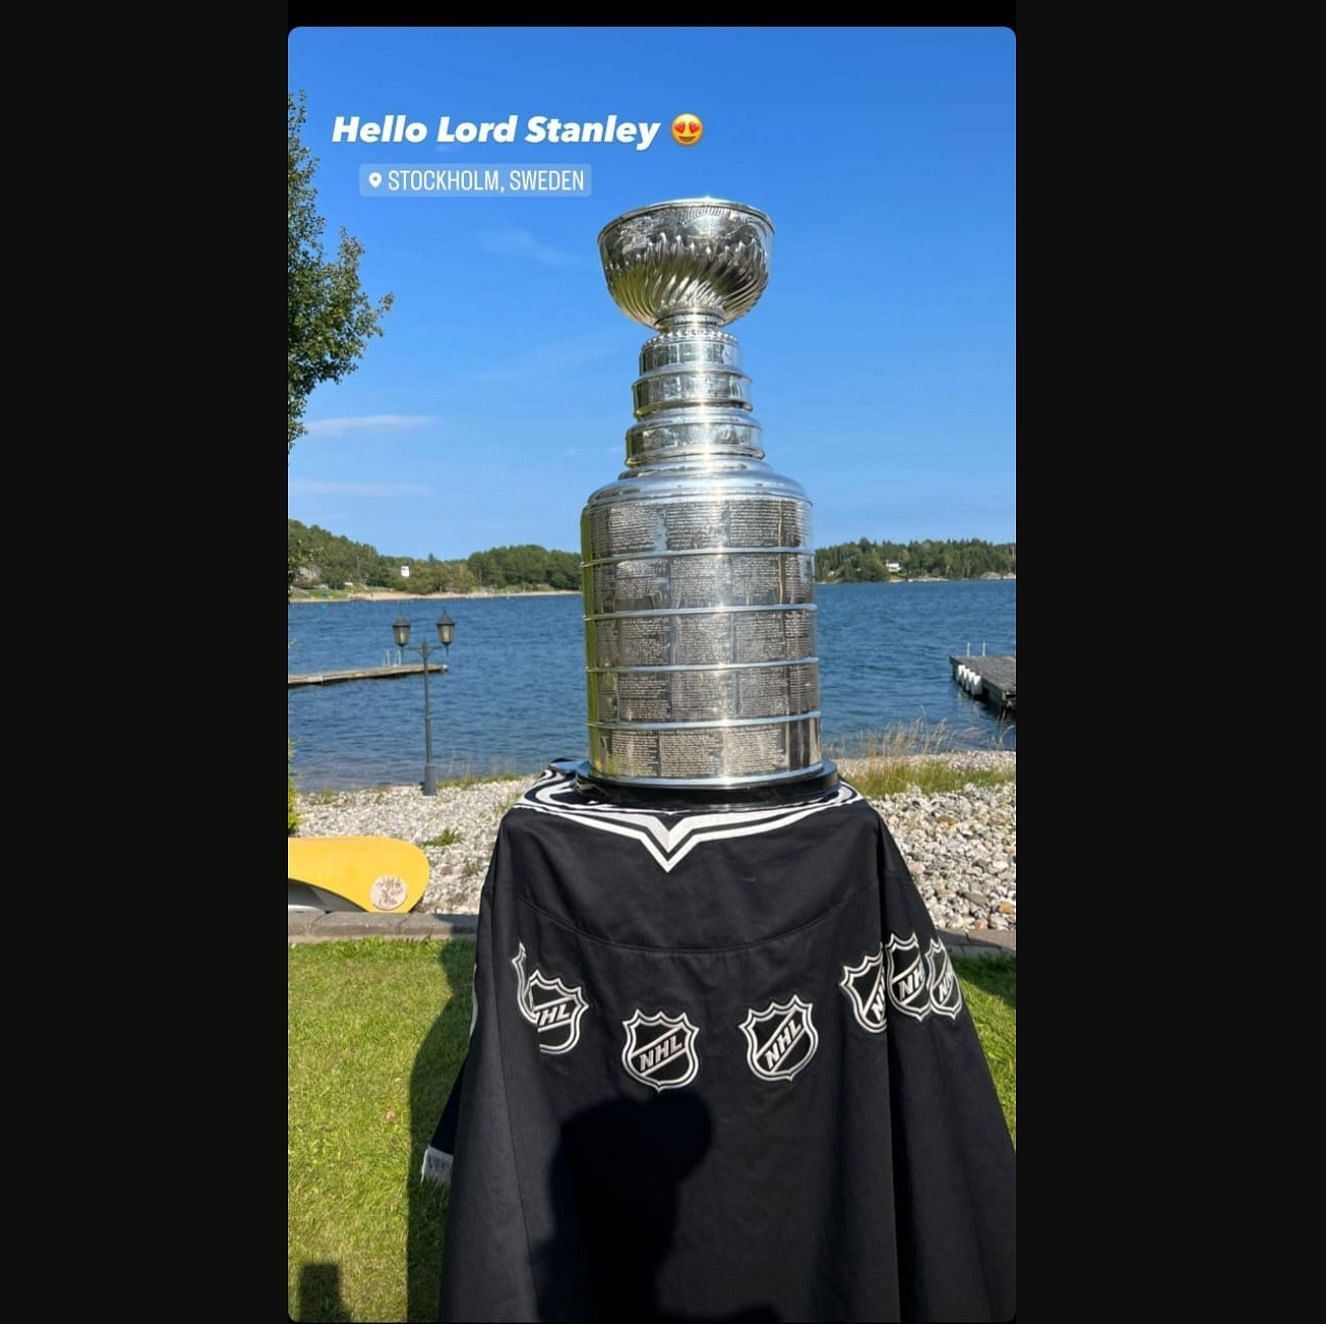 Emily's husband Will & his team the Vegas Golden Knights won the Stanley Cup  - here's baby Beckham in the cup 🫶🏻 : r/TheBachelorette